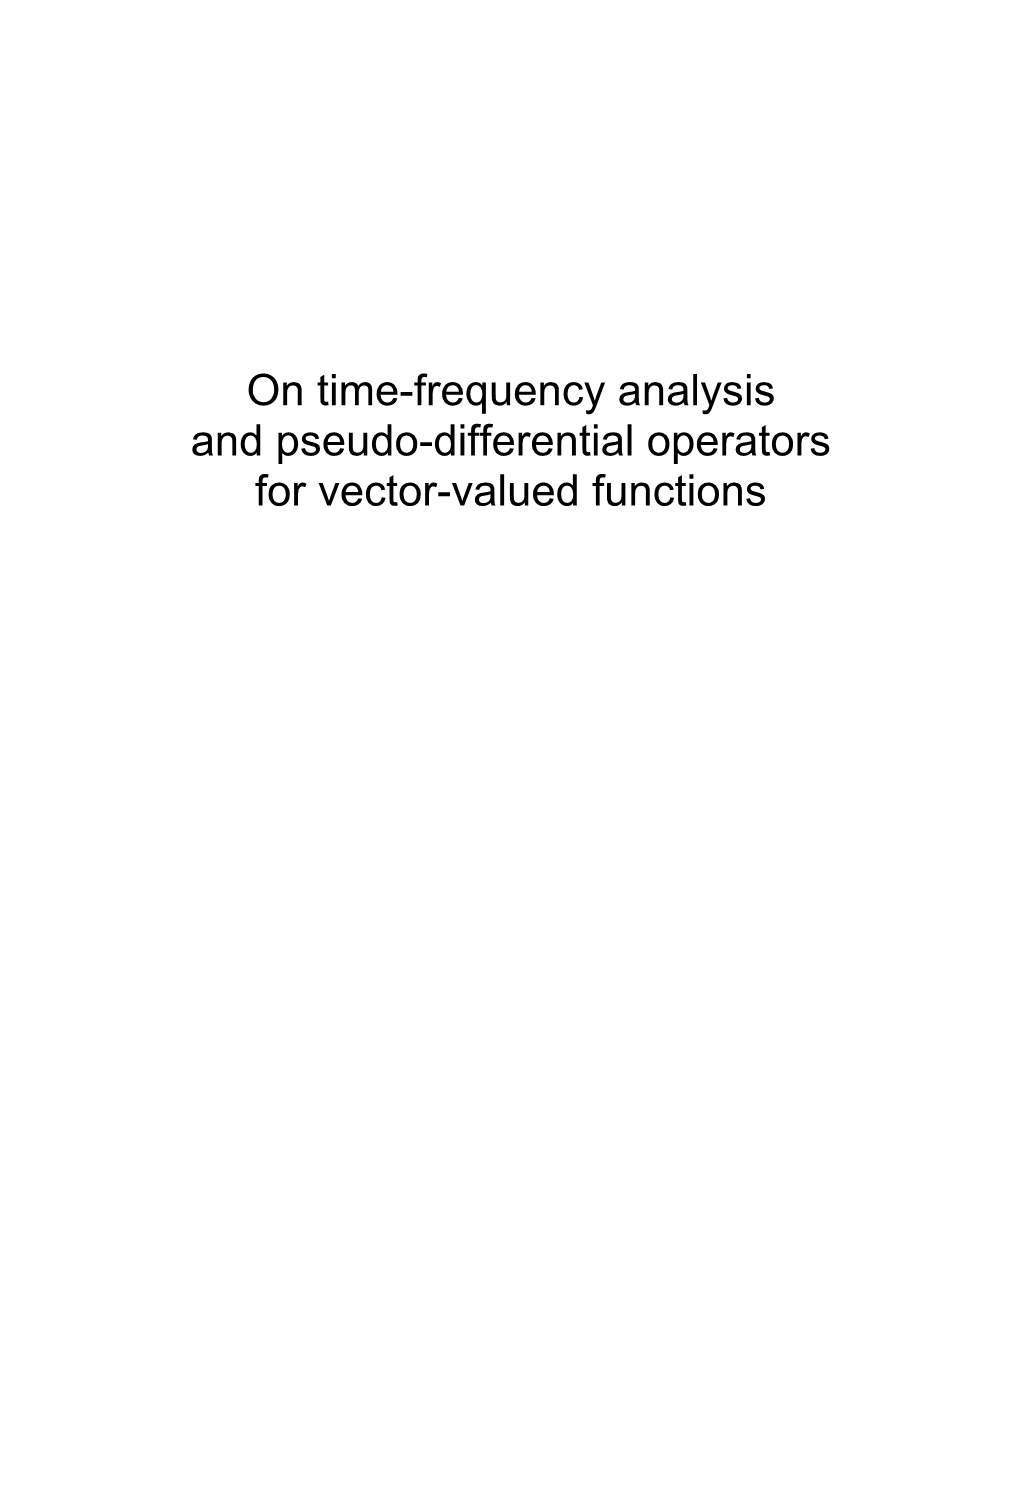 On Time-Frequency Analysis and Pseudo-Differential Operators for Vector-Valued Functions